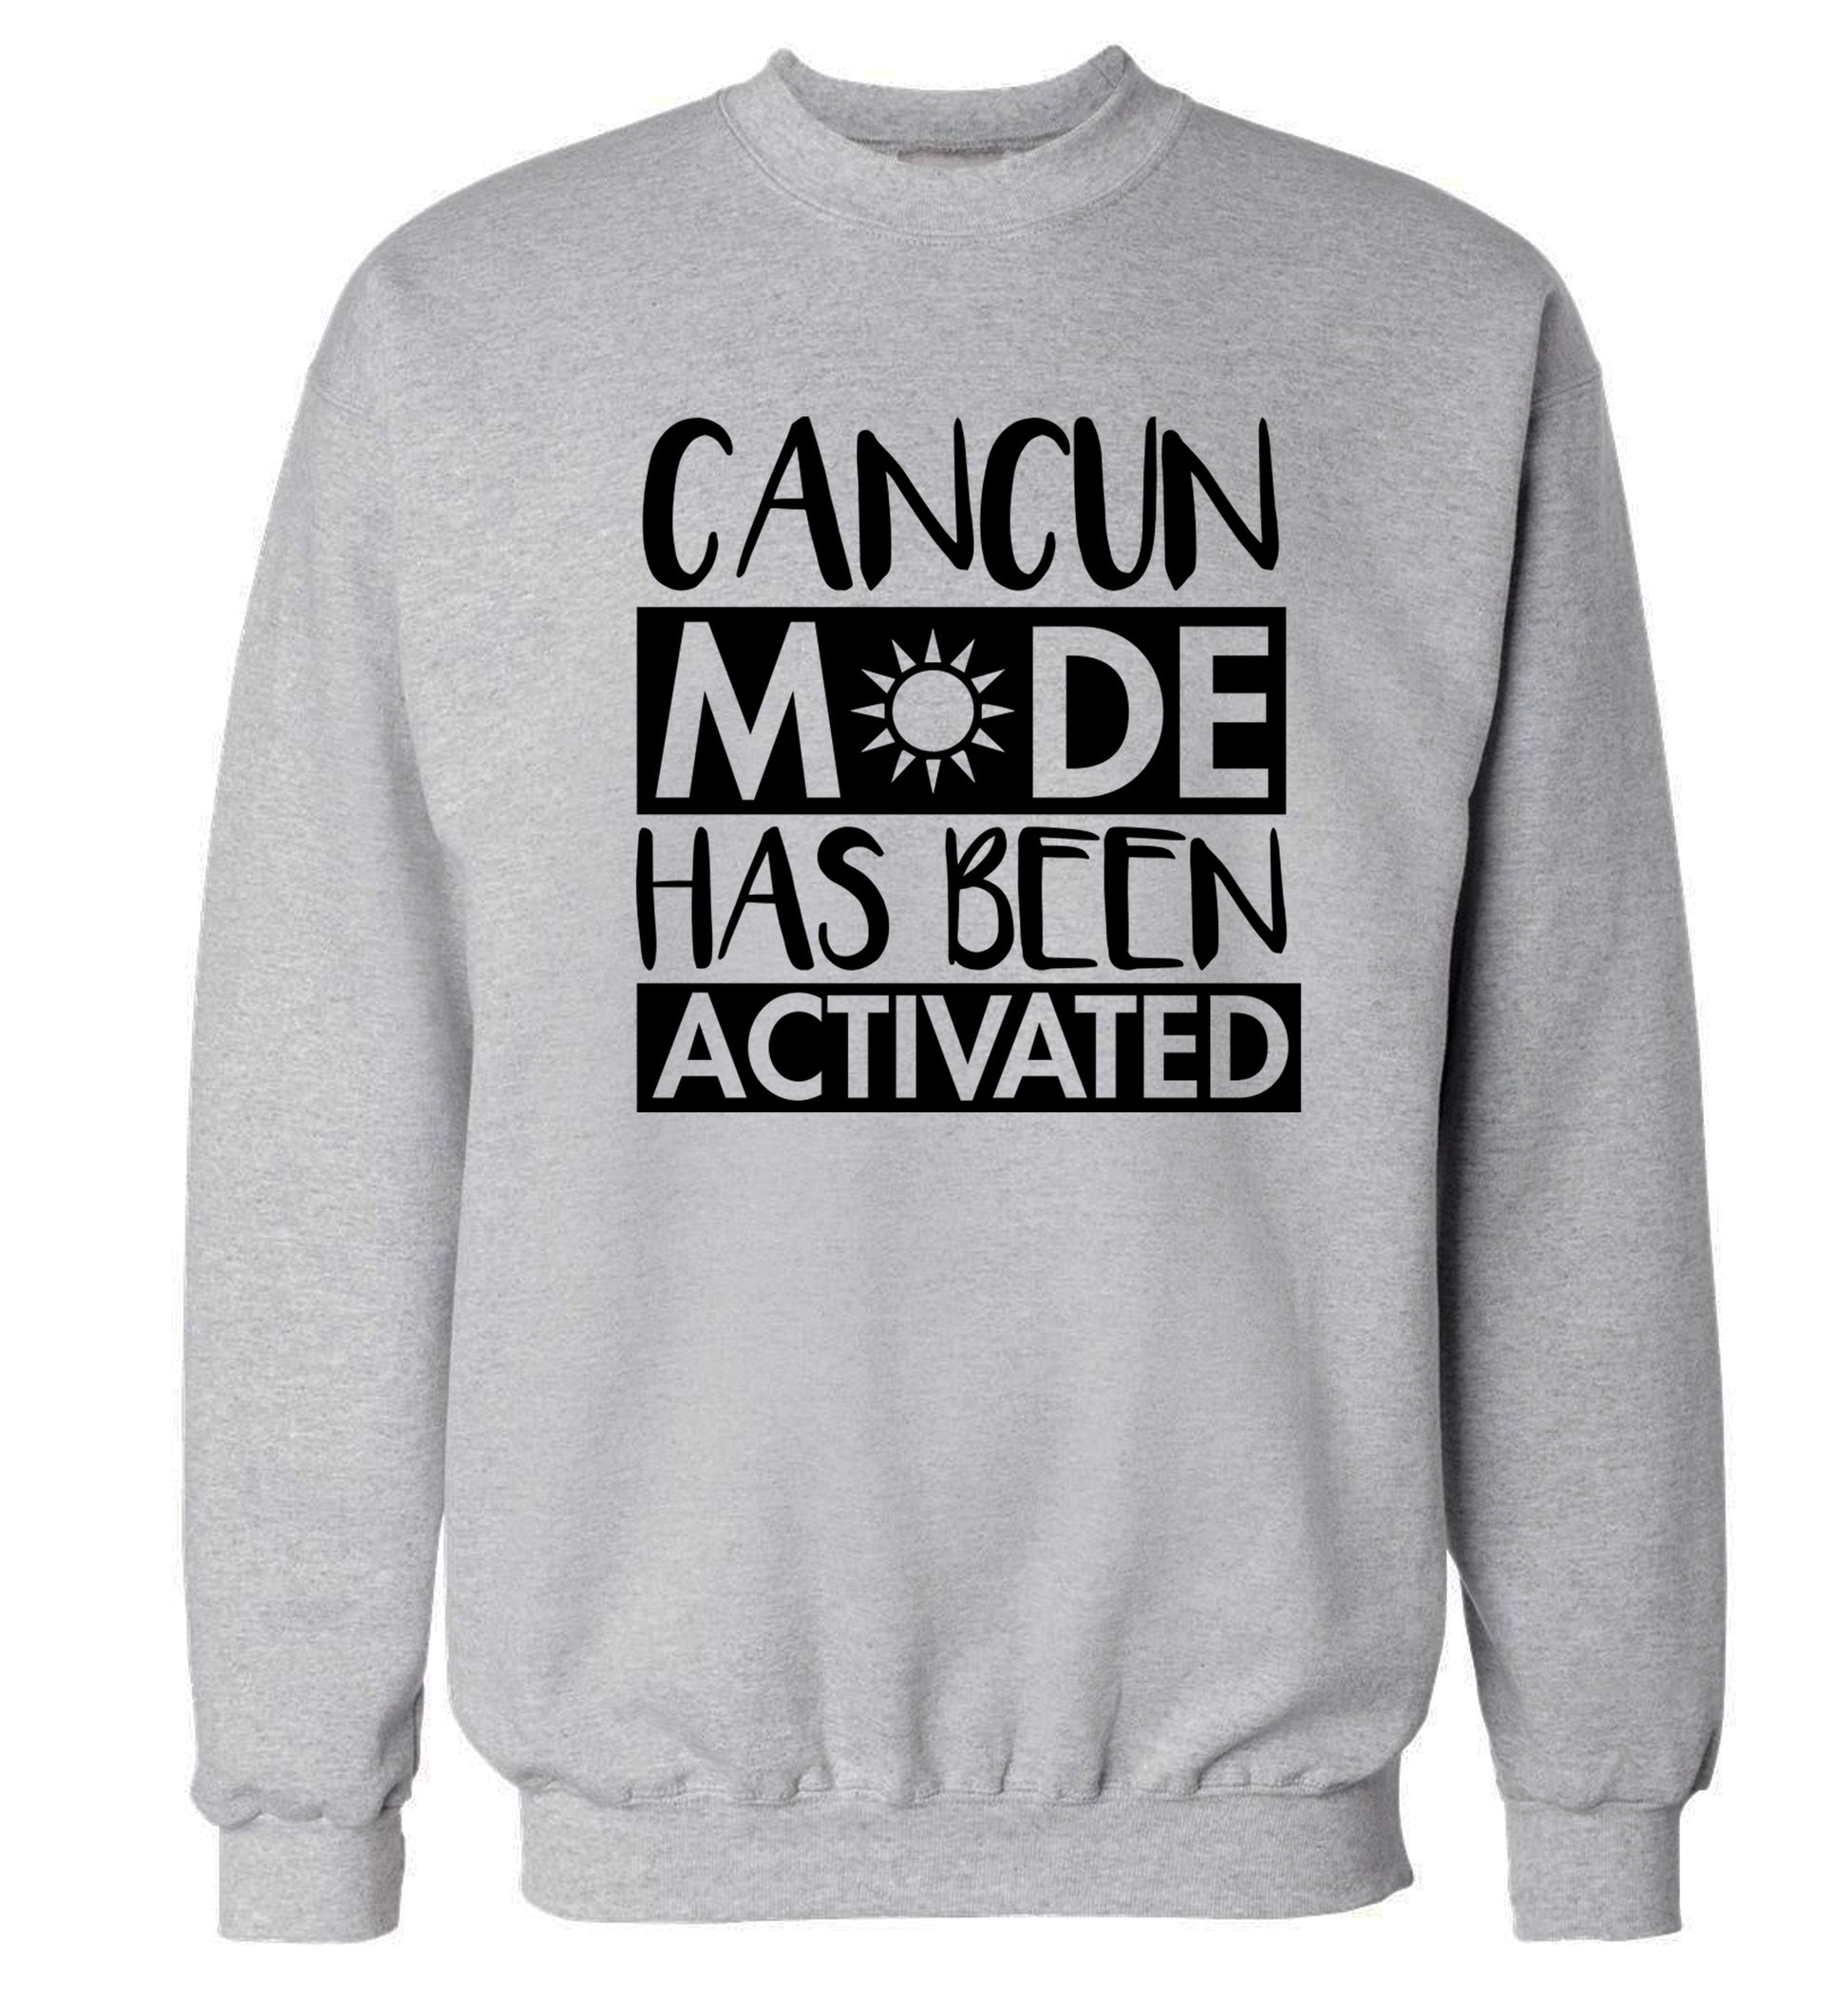 Cancun mode has been activated Adult's unisex grey Sweater 2XL